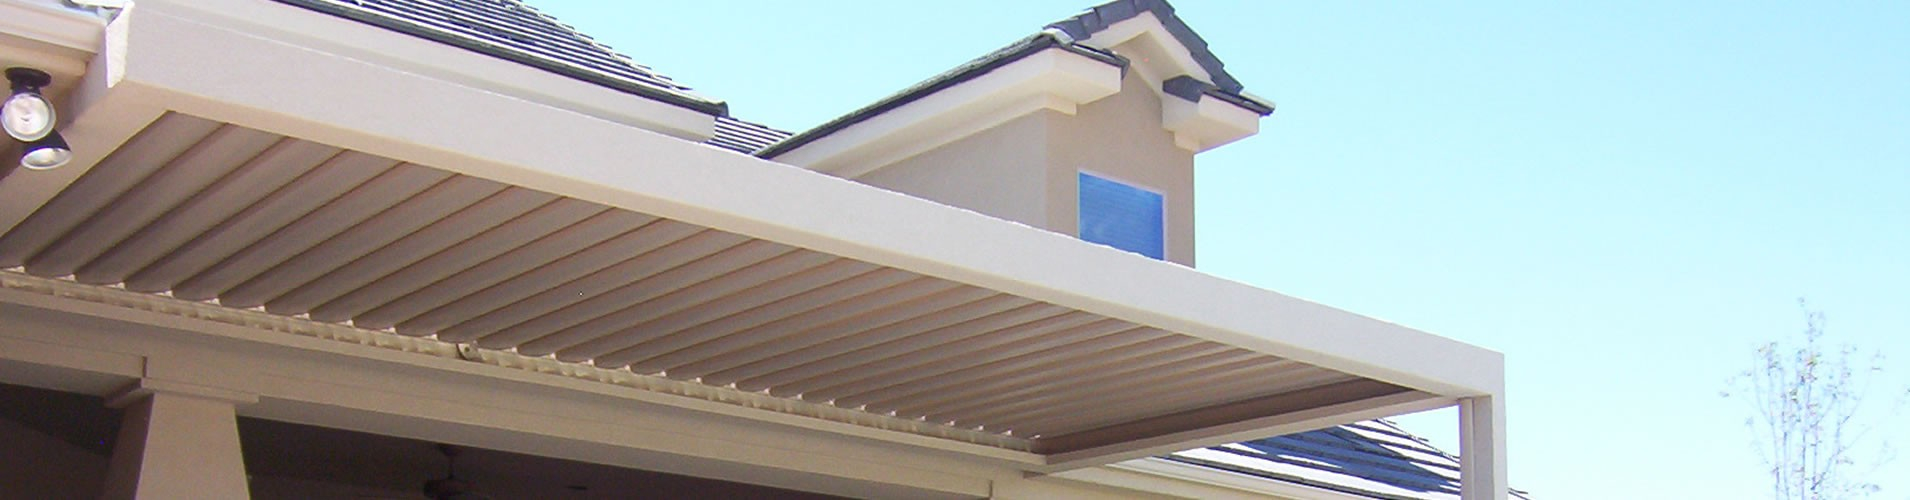 Dallas Patio Covers Louvered Roofs Texas Patio Systems within measurements 1910 X 500